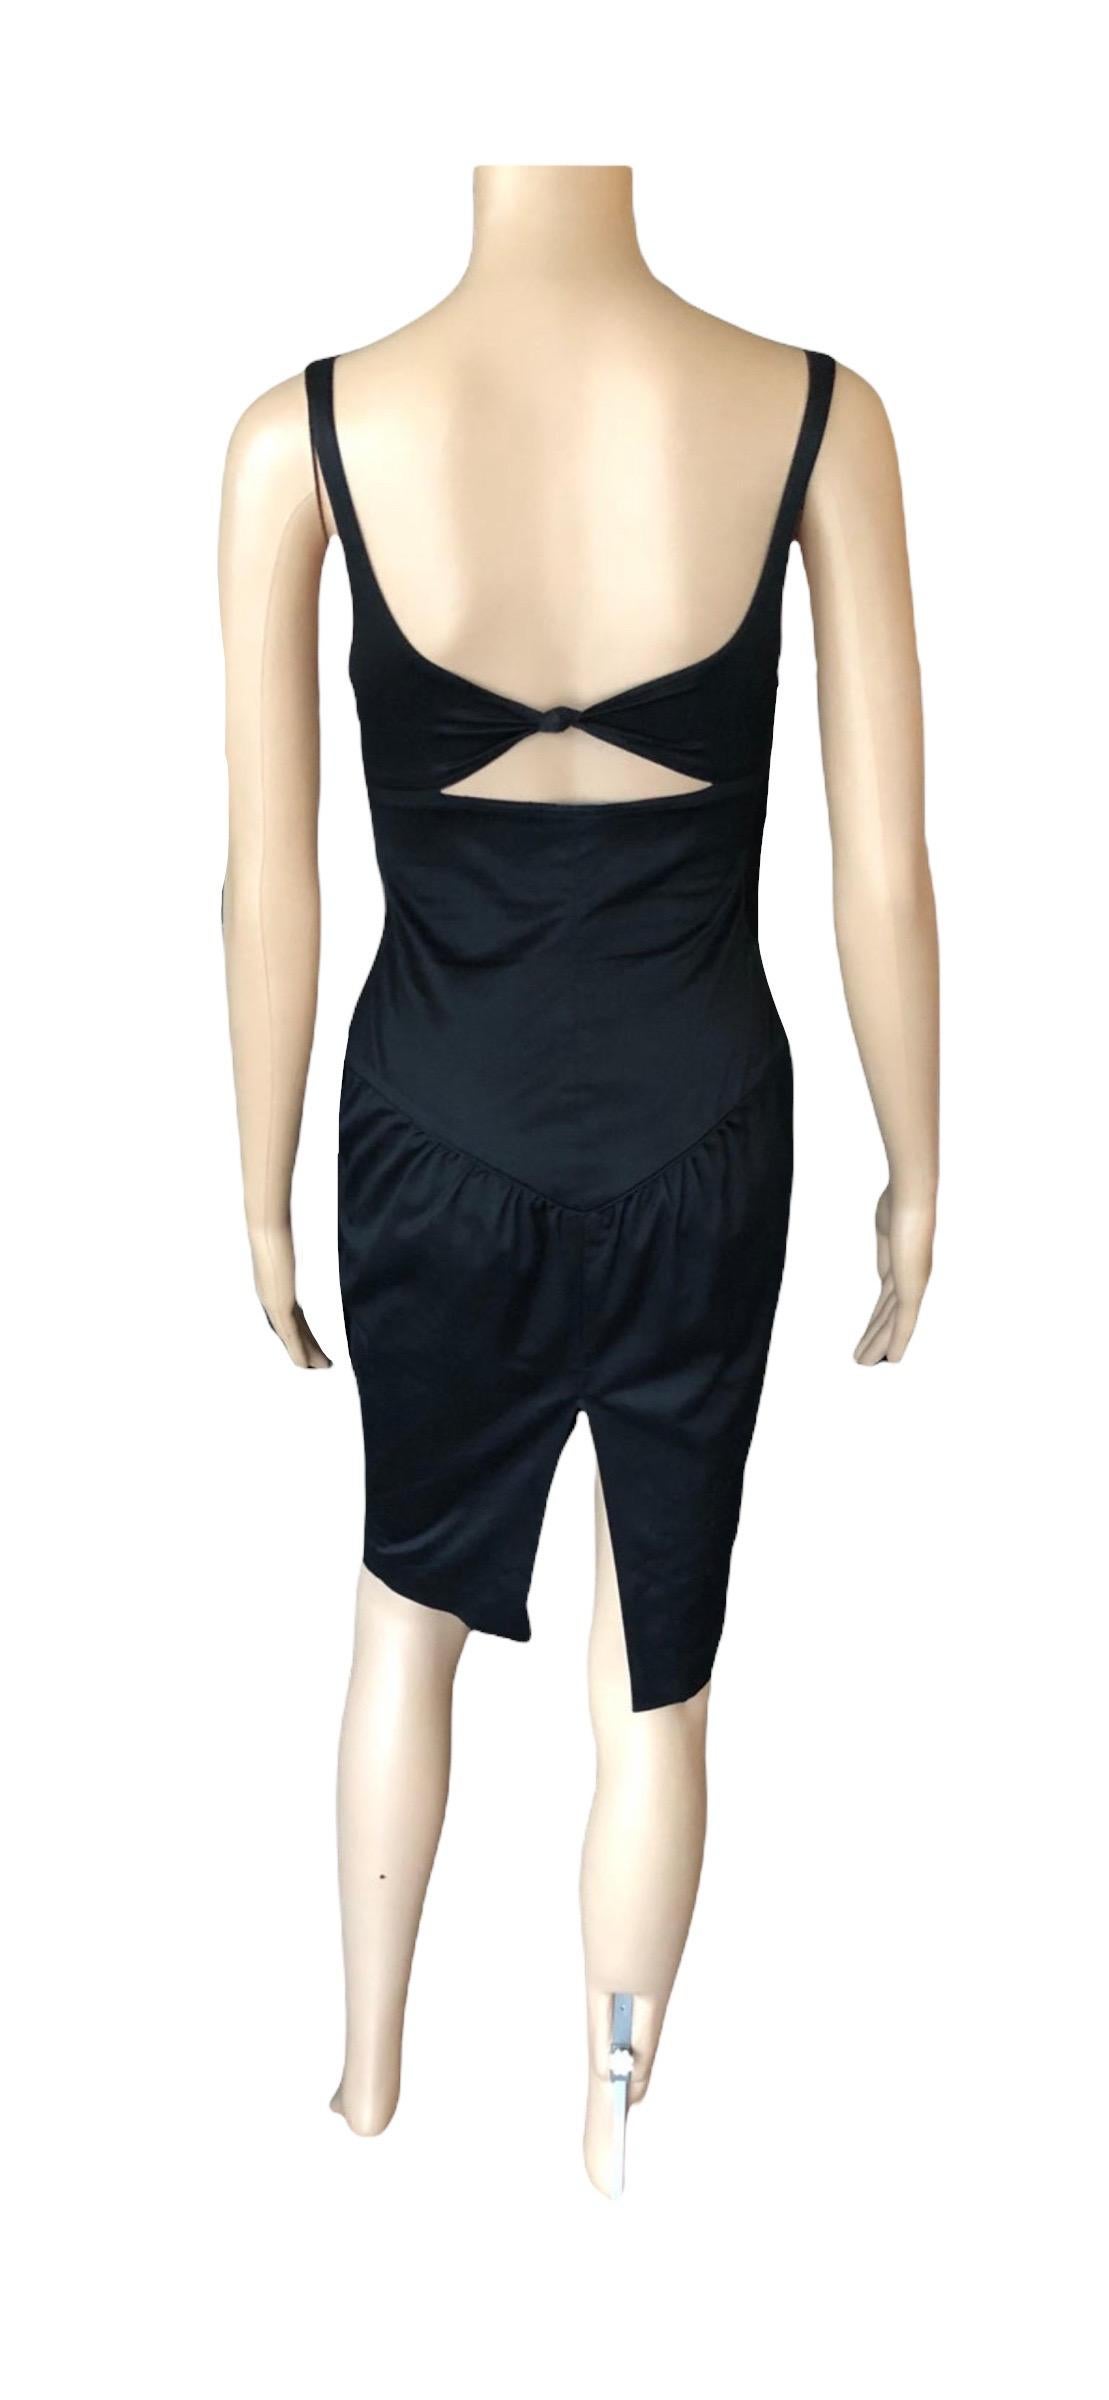 Tom Ford for Gucci 2003 Bustier Cutout Back Black Mini Dress For Sale 2